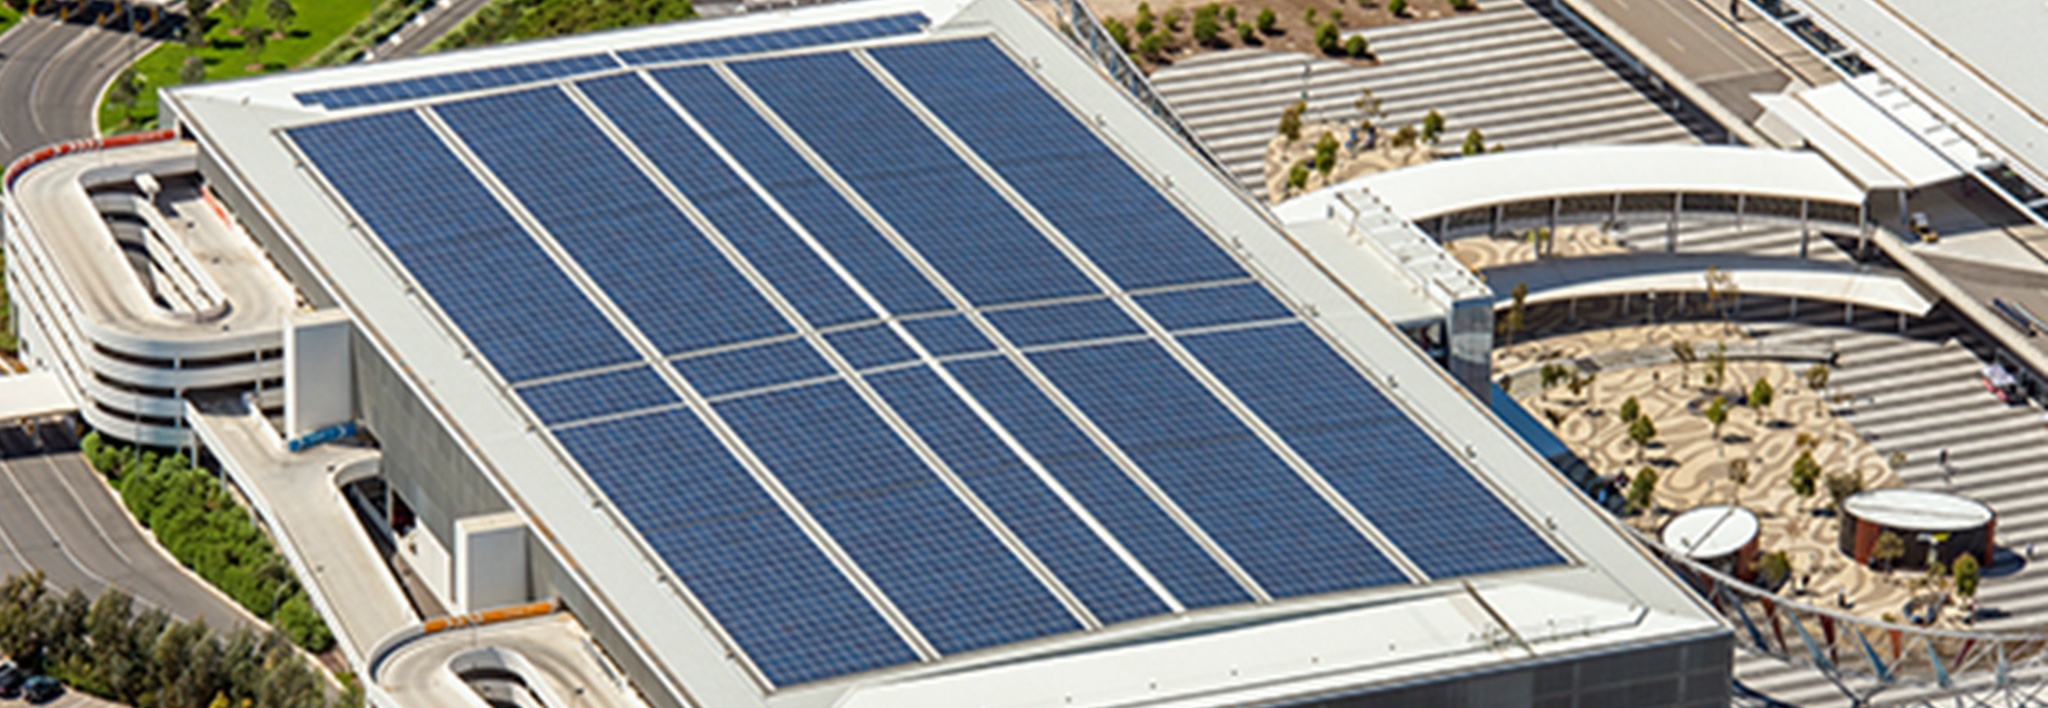 Clenergy Rooftop PV-ezRack SolarRoof 1.2MW Solar Project at Solgen Adelaide Airport 01